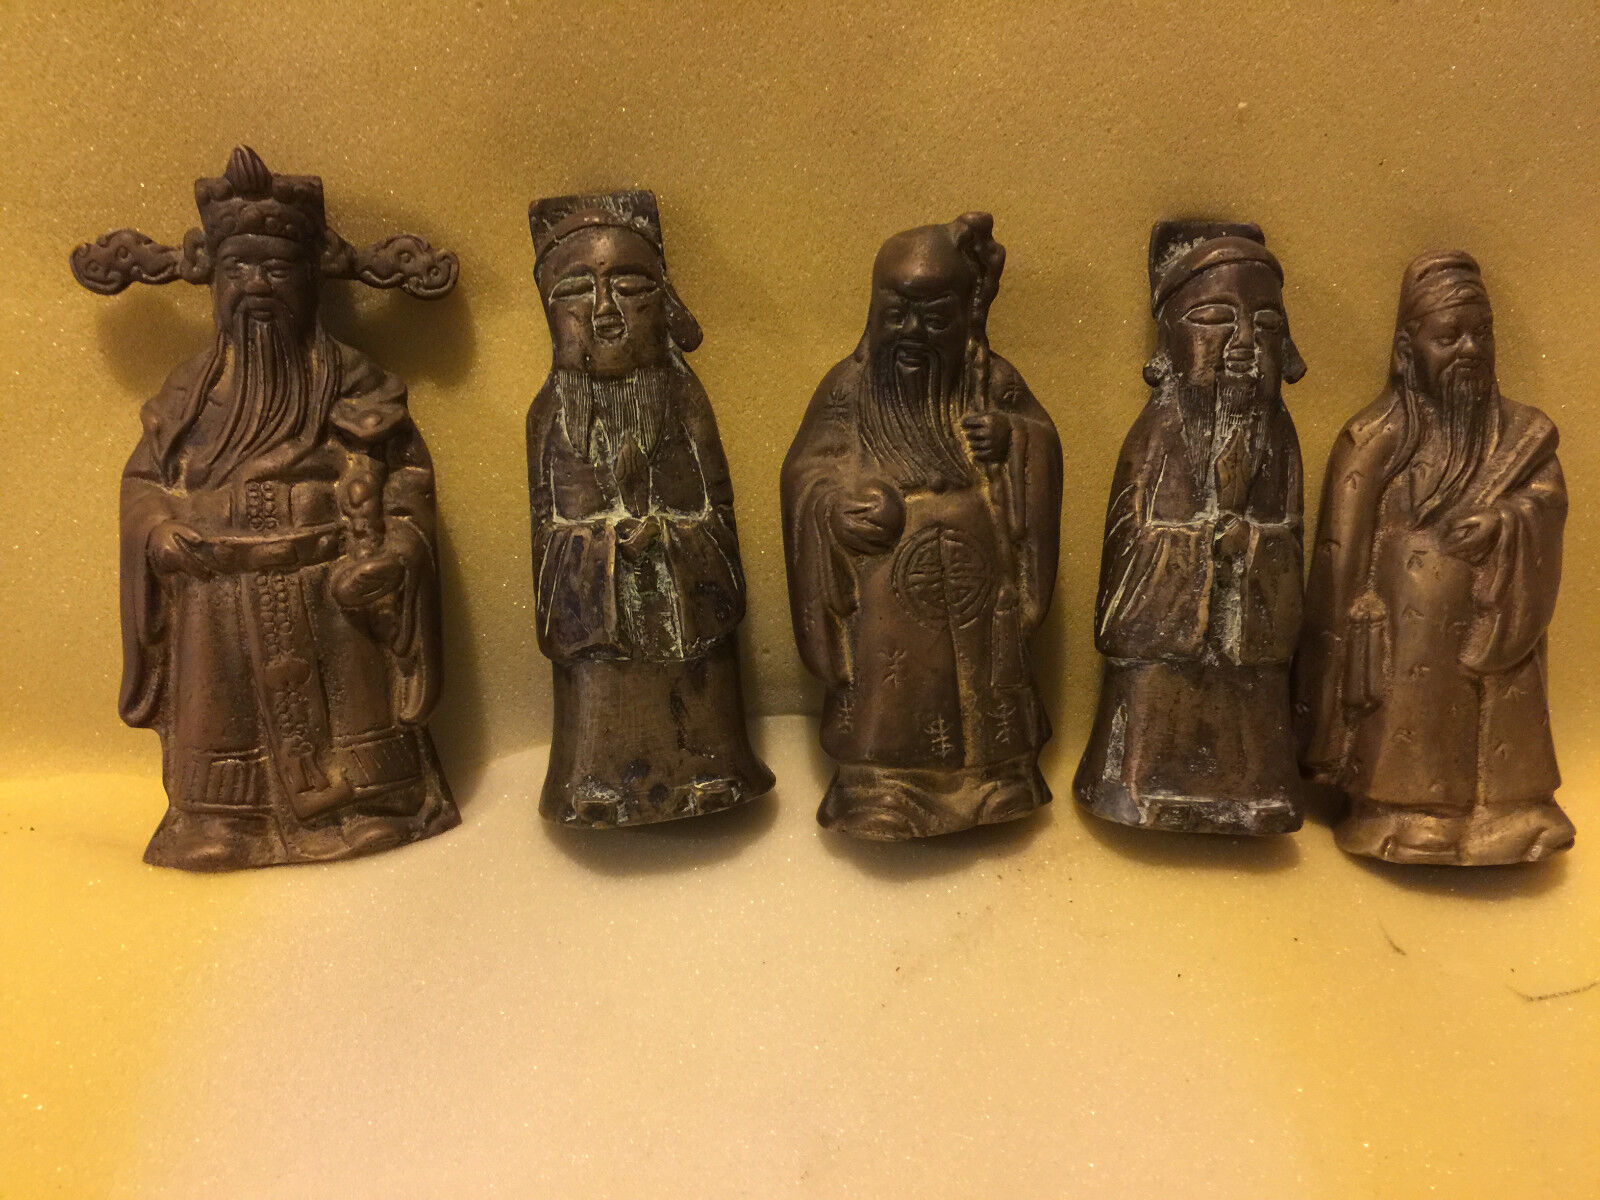 ANTIQUE CHINESE BRASS OR BRONZE WISE MEN (5) IN A BUNDLE 5.5" TALL FROM ESTATE Без бренда